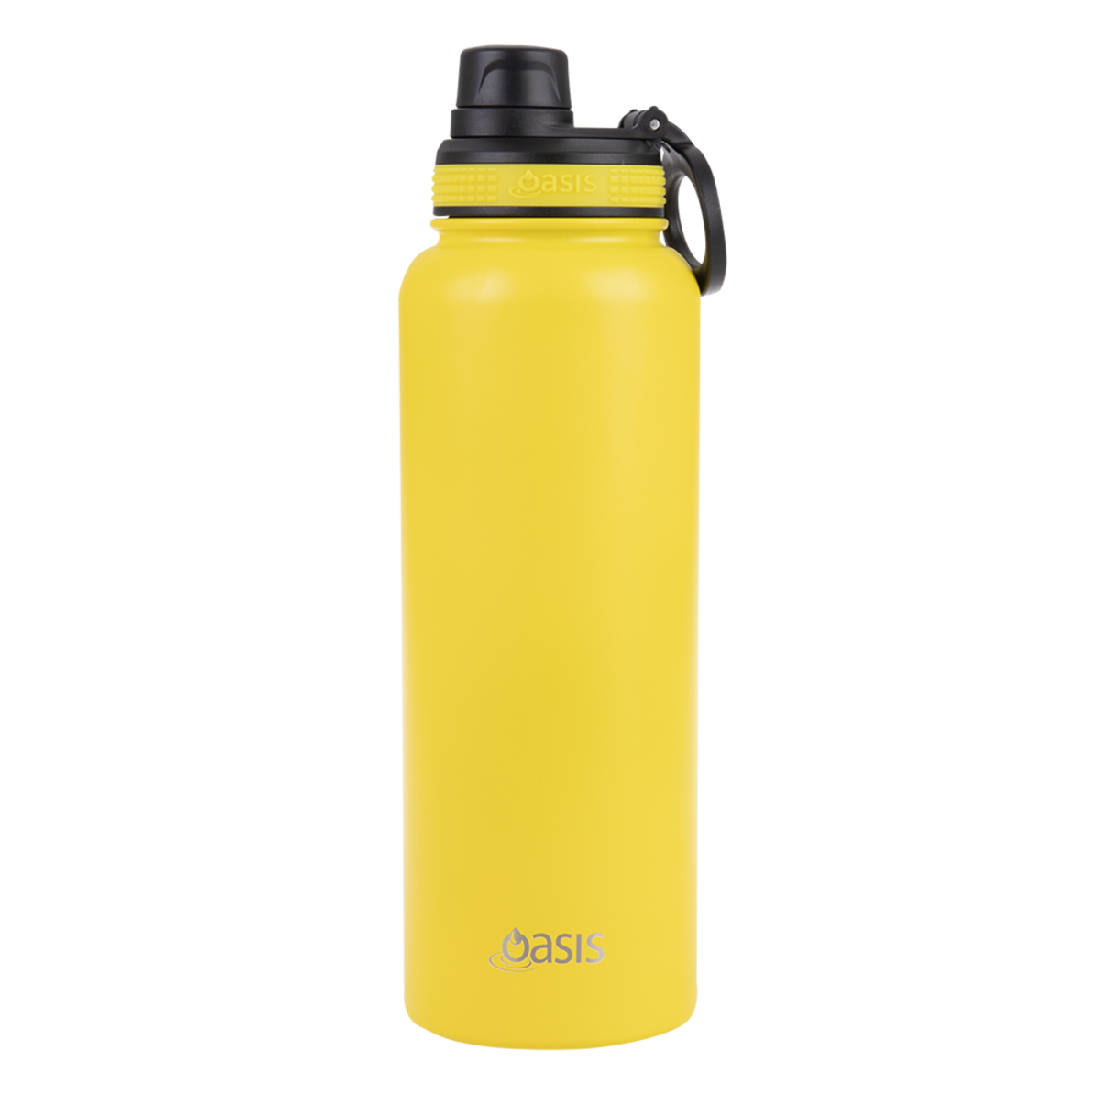 Oasis Stainless Steel Double Wall Insulated "challenger" Sports Bottle W/ Screw Cap 1.1l - Neon Yellow